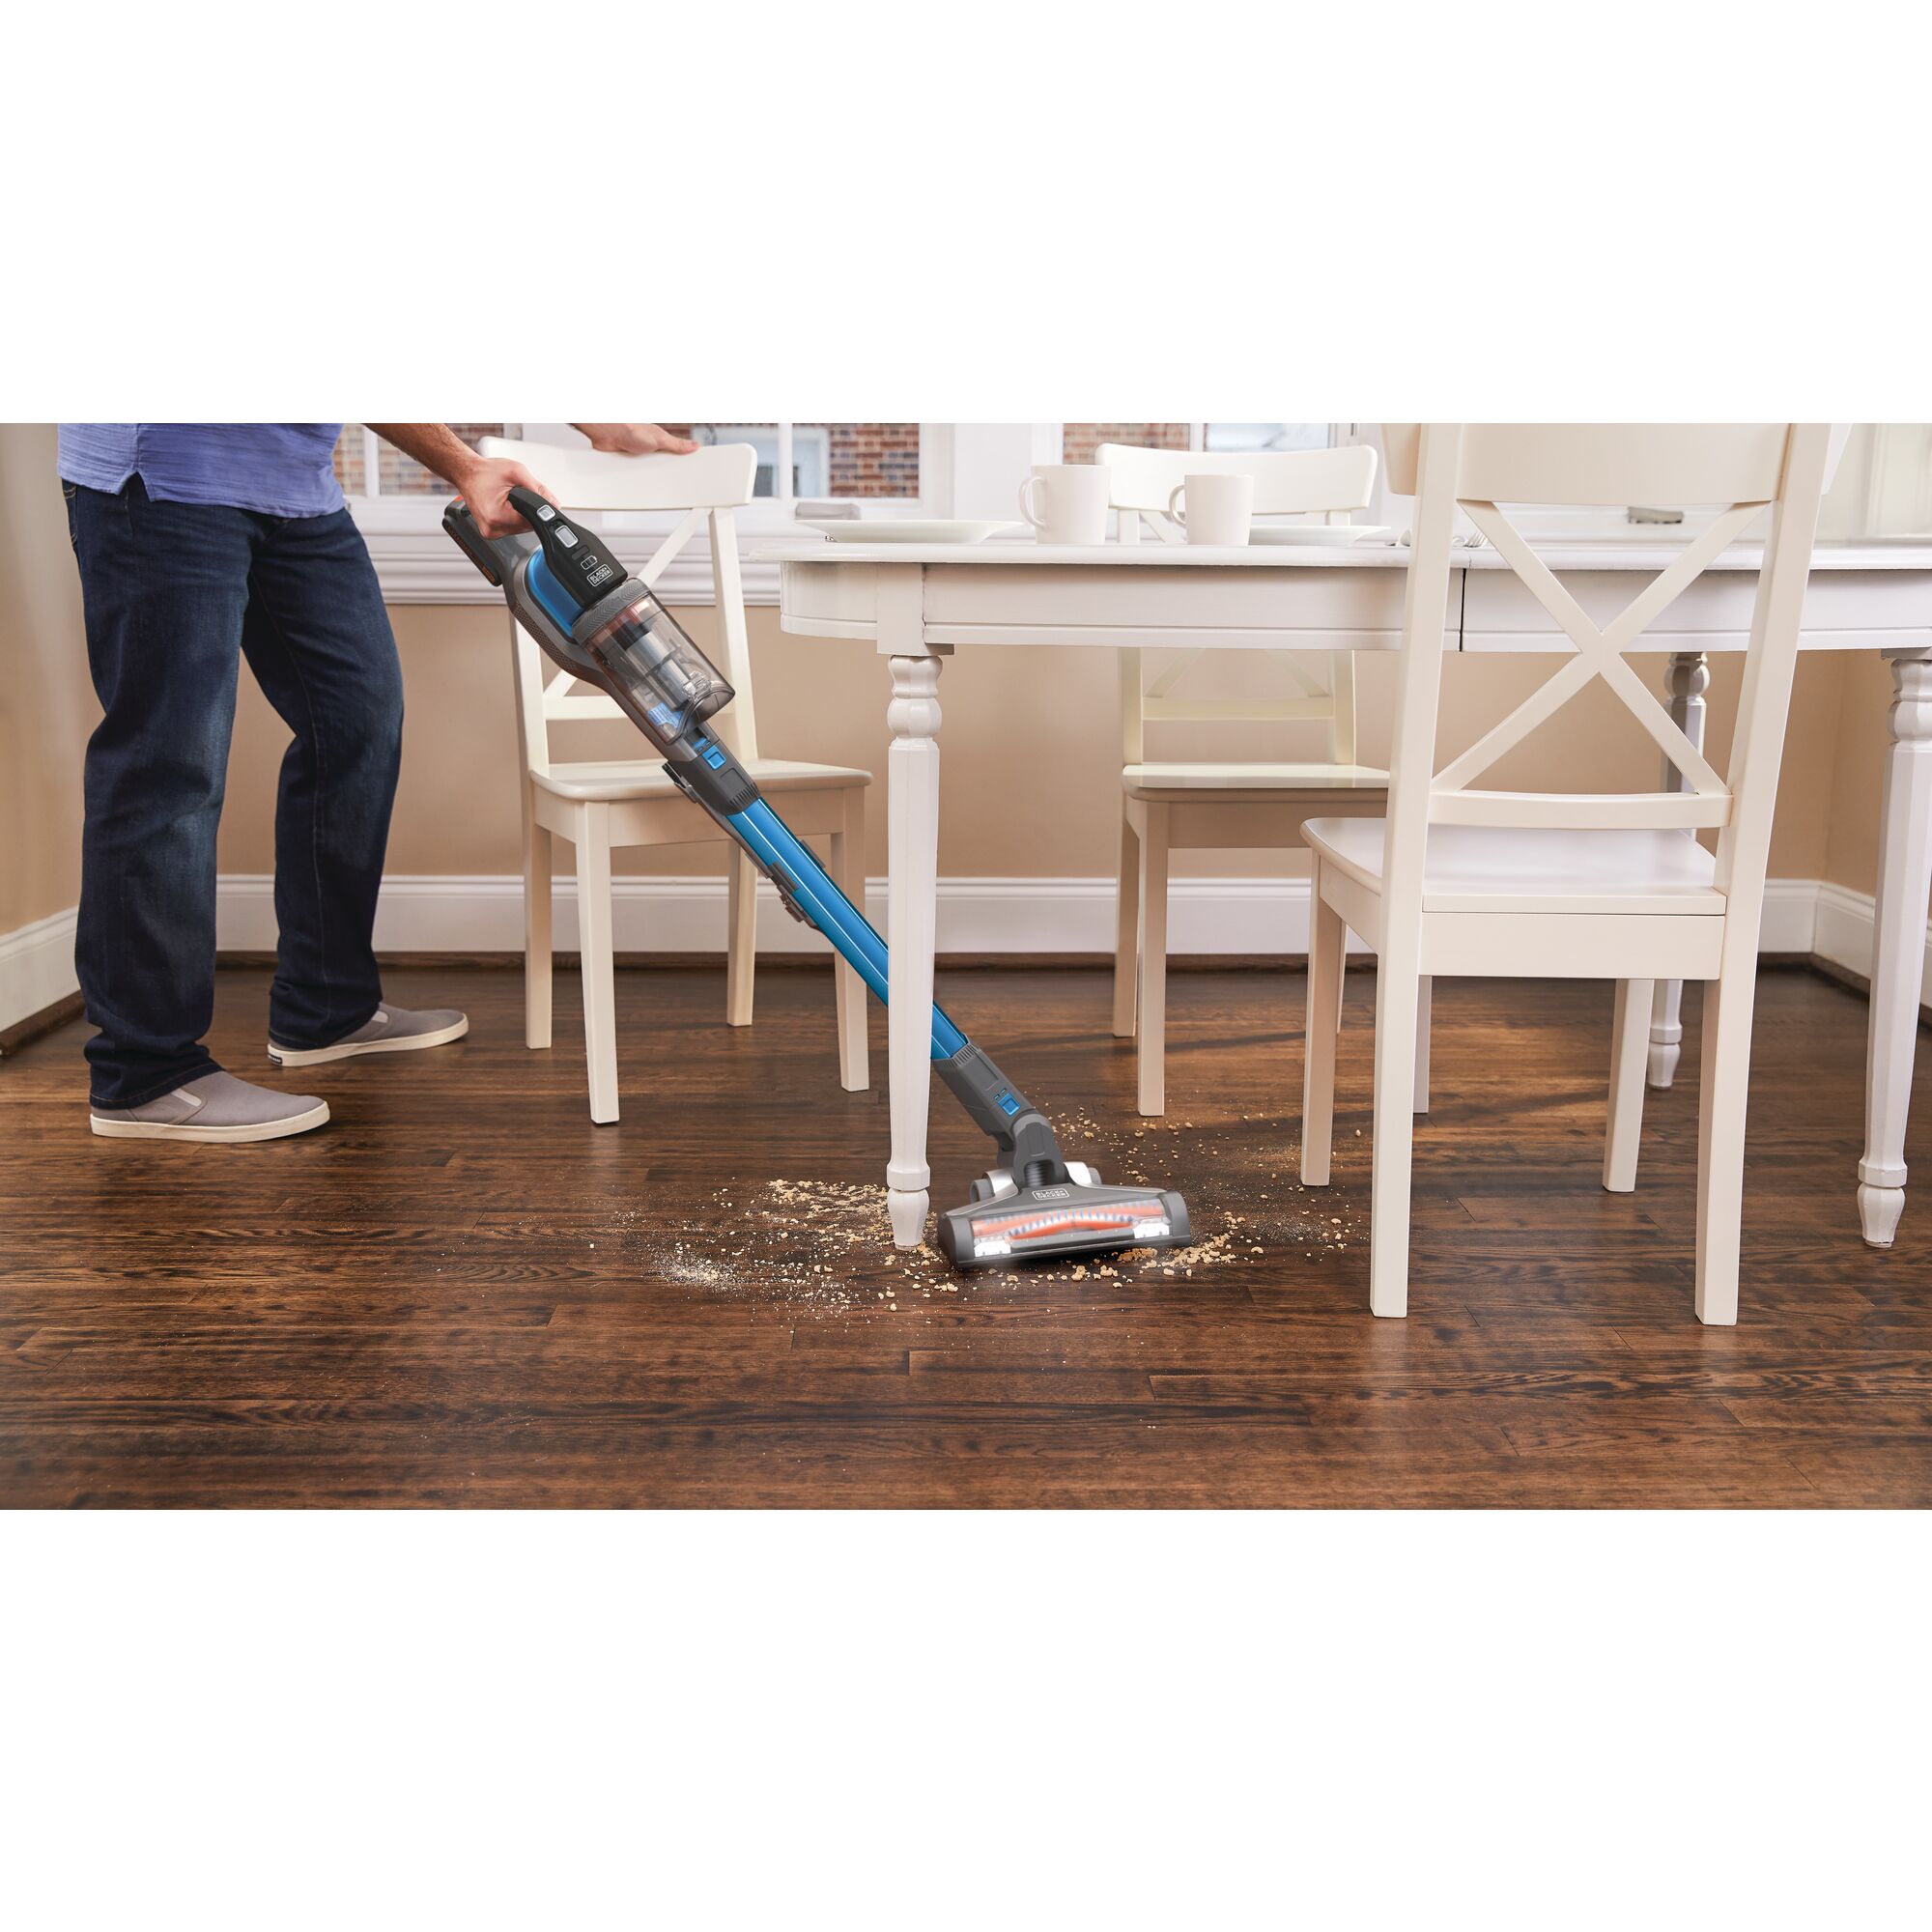 POWER SERIES Extreme Cordless Stick Vacuum Cleaner being used for cleaning mess under dining table.